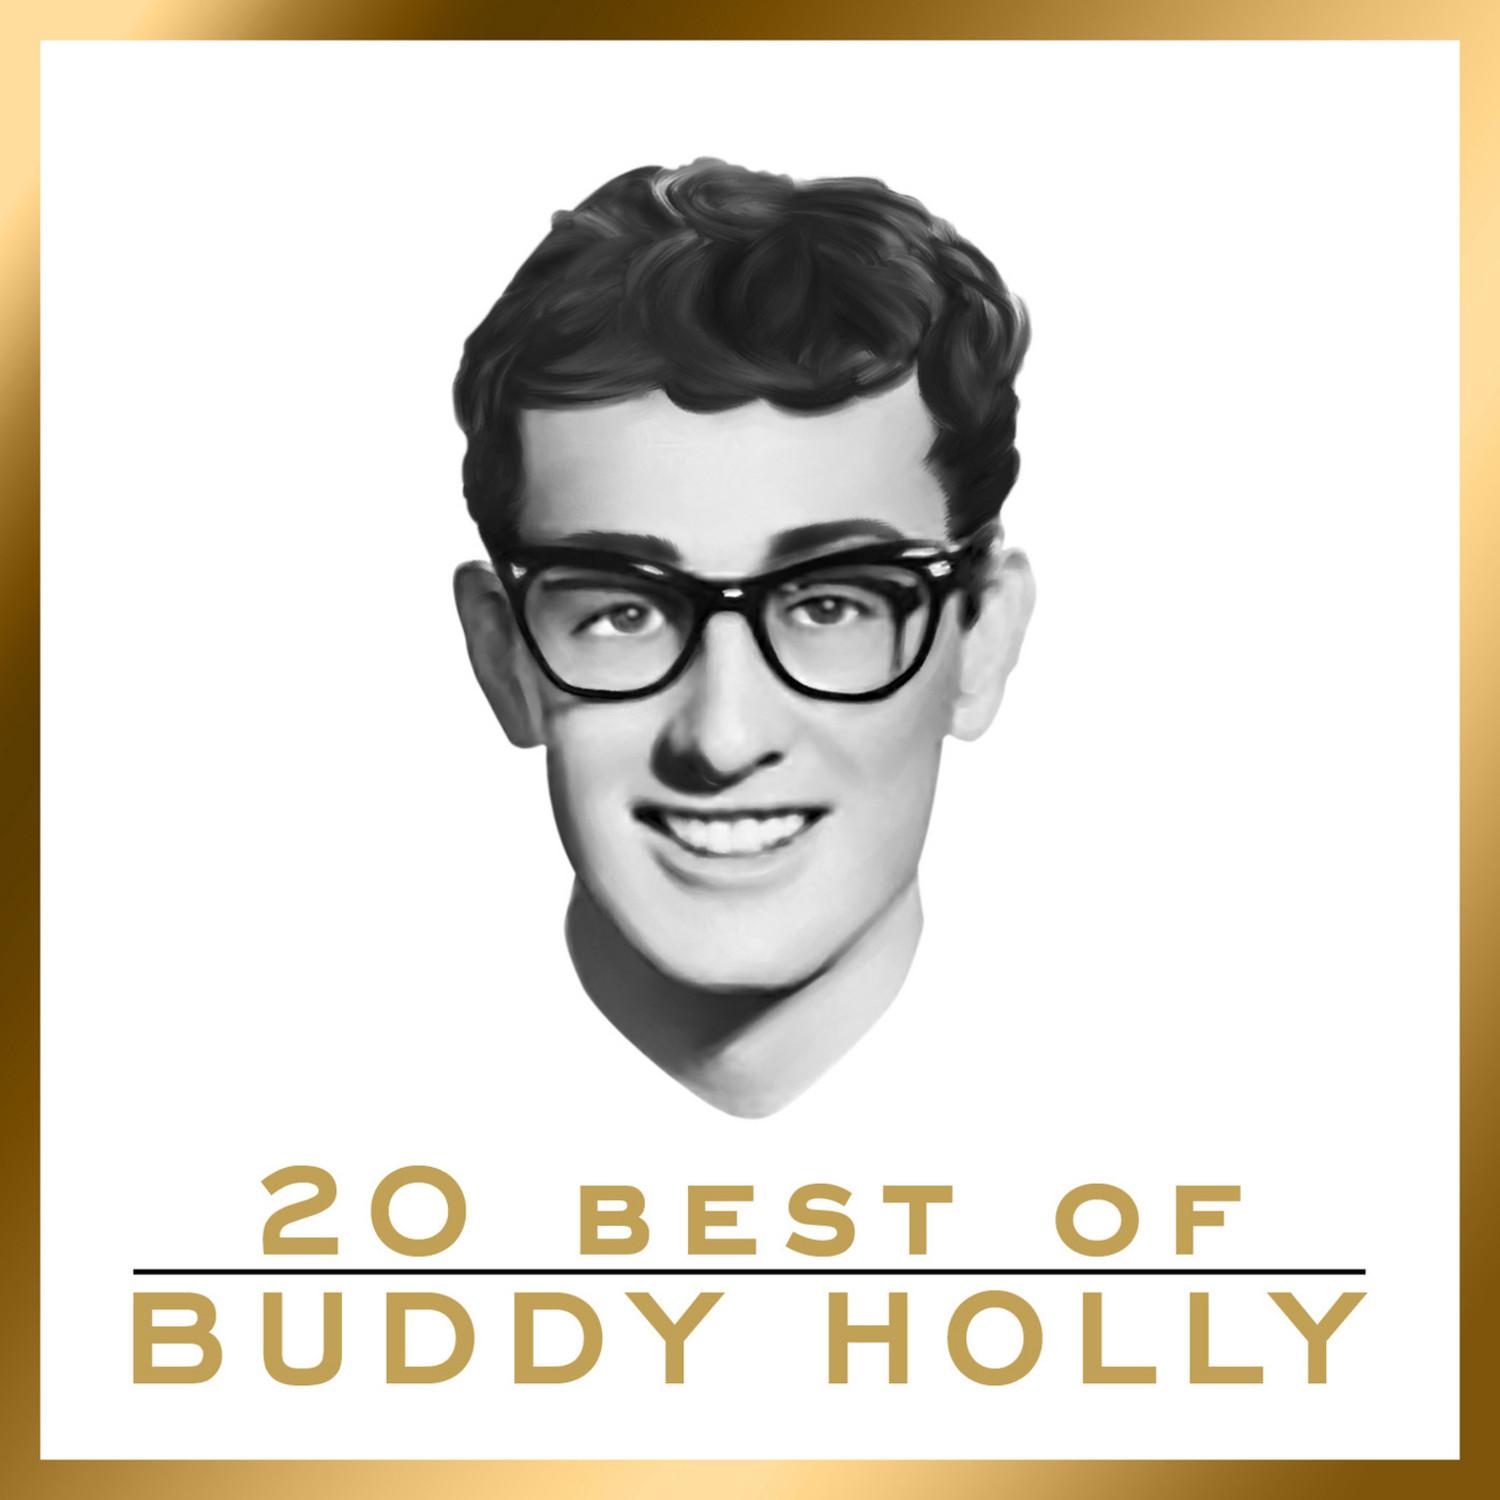 20 Best of Buddy Holly